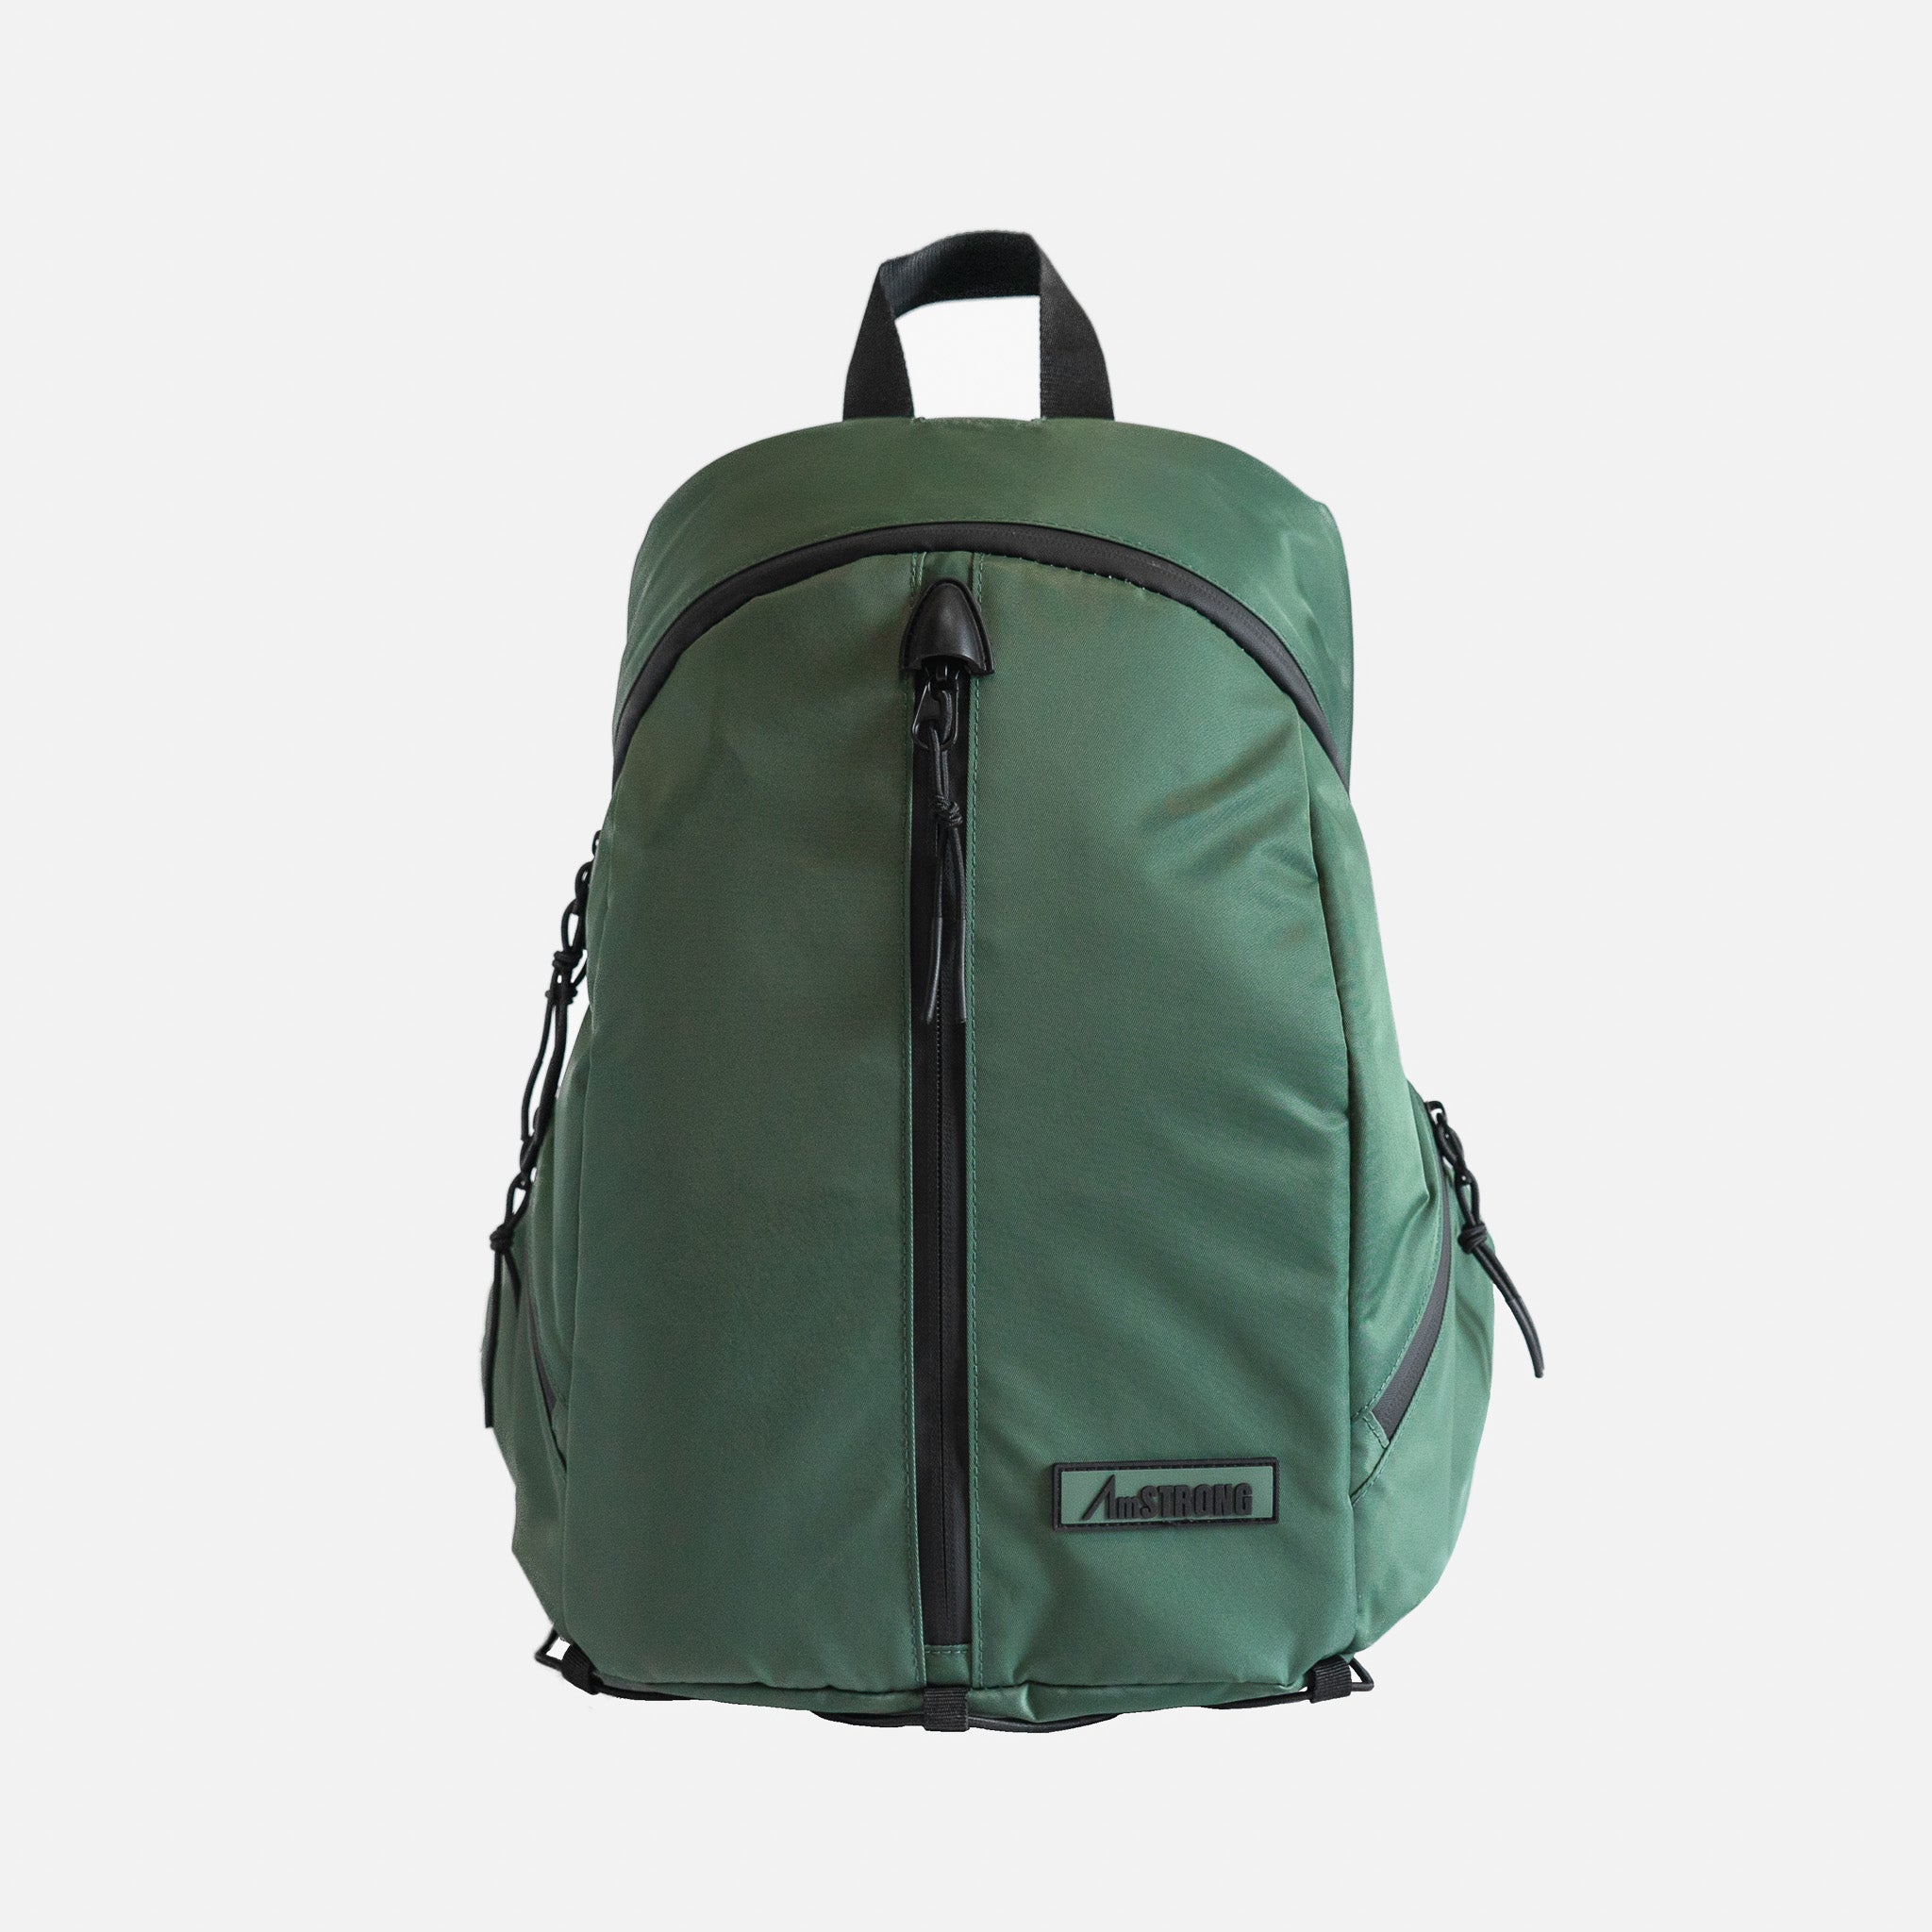 AmSTRONG | 01-INSULATED BACKPACK